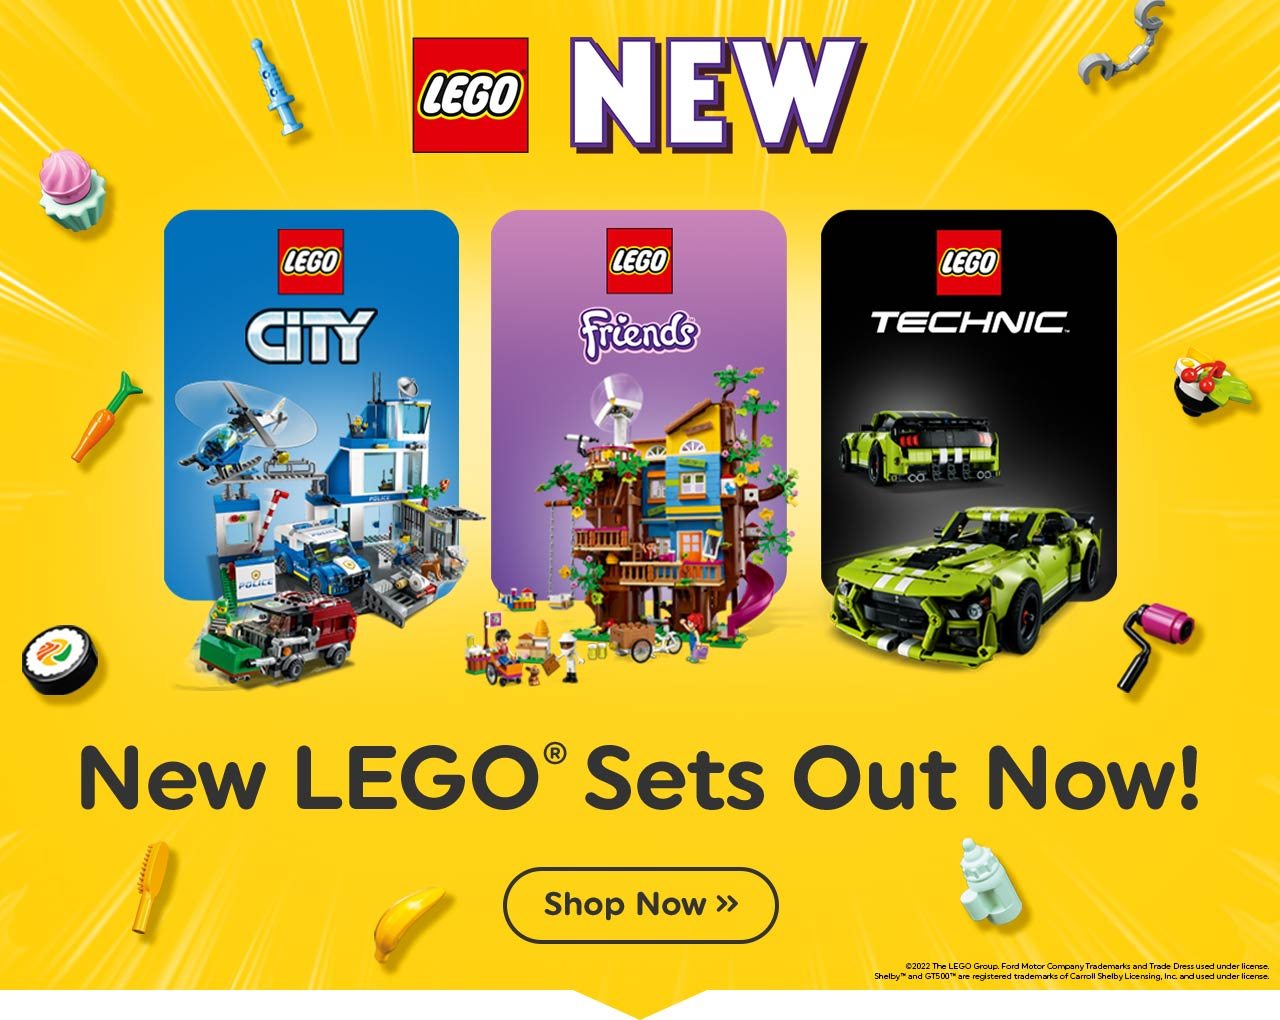 NEW LEGO® Sets Out Now! Smyths Toys Superstores Email Archive